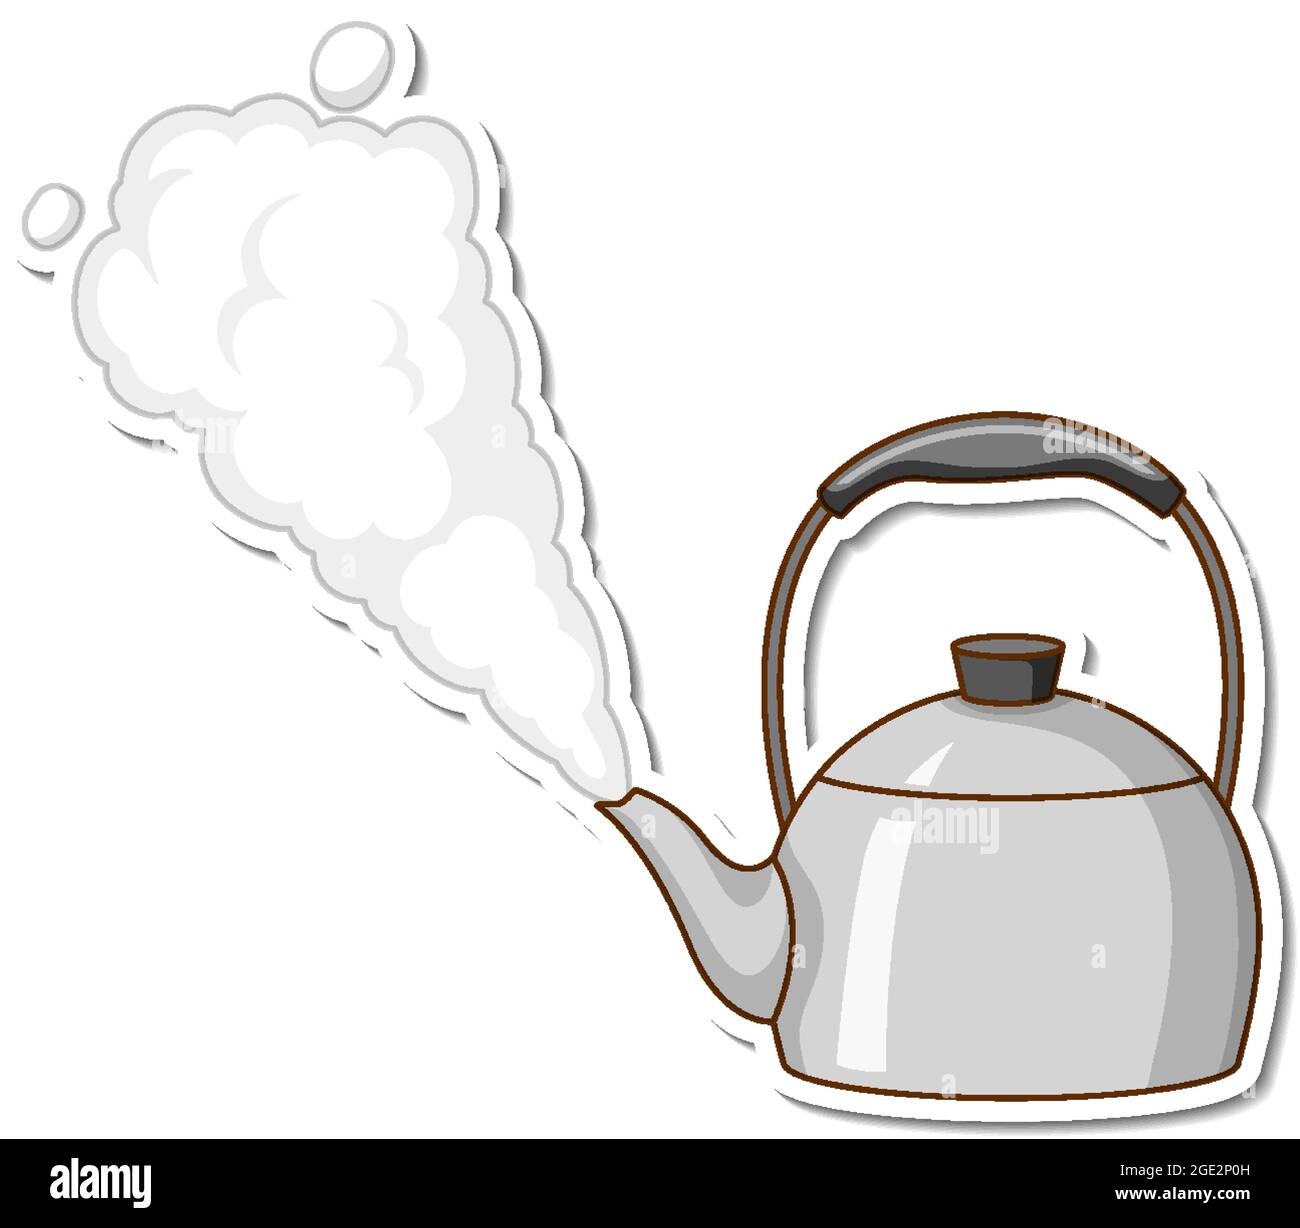 https://c8.alamy.com/comp/2GE2P0H/a-sticker-template-of-a-kettle-with-boiling-water-isolated-illustration-2GE2P0H.jpg